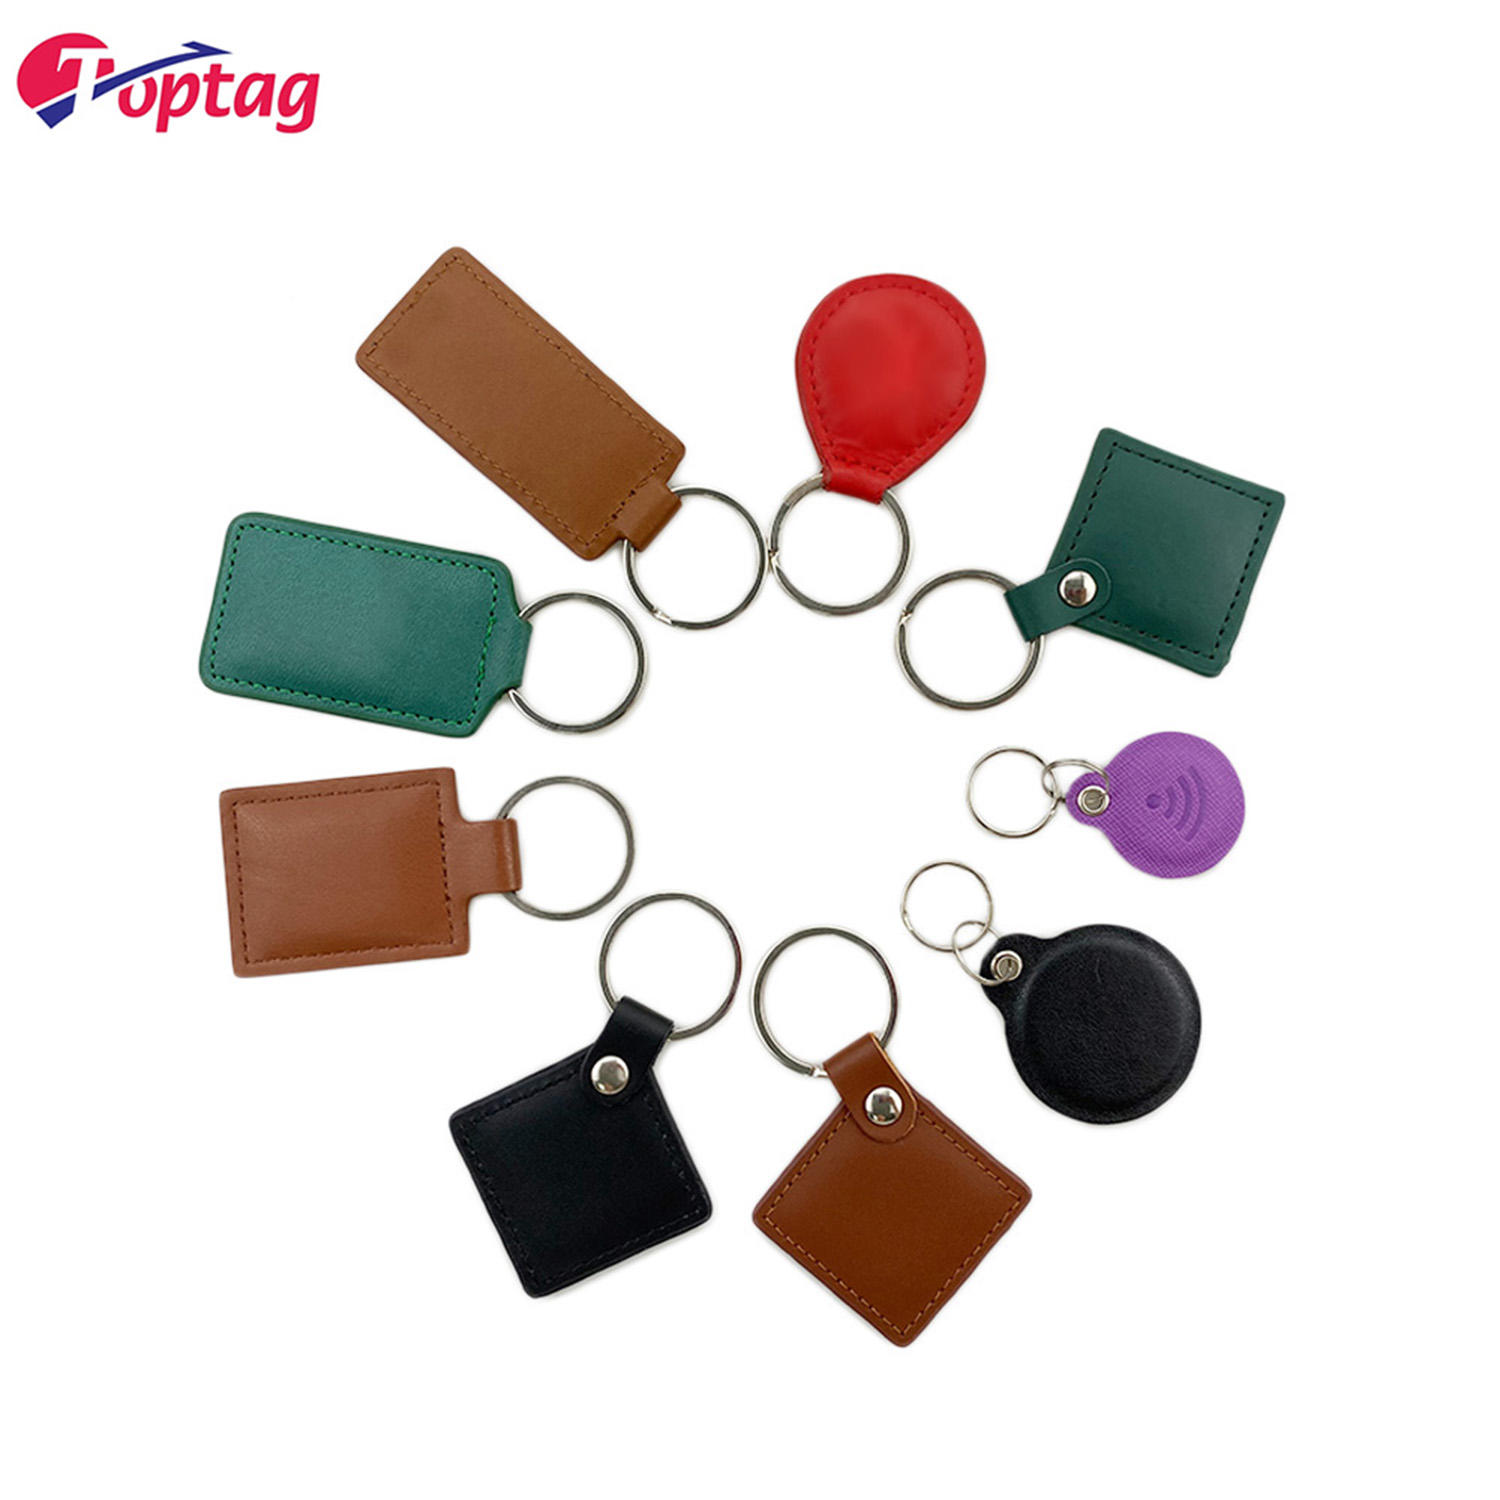 Different Styles 125Khz LF PU Key Fobs Waterproof RFID Leather Key Tags for Access Control